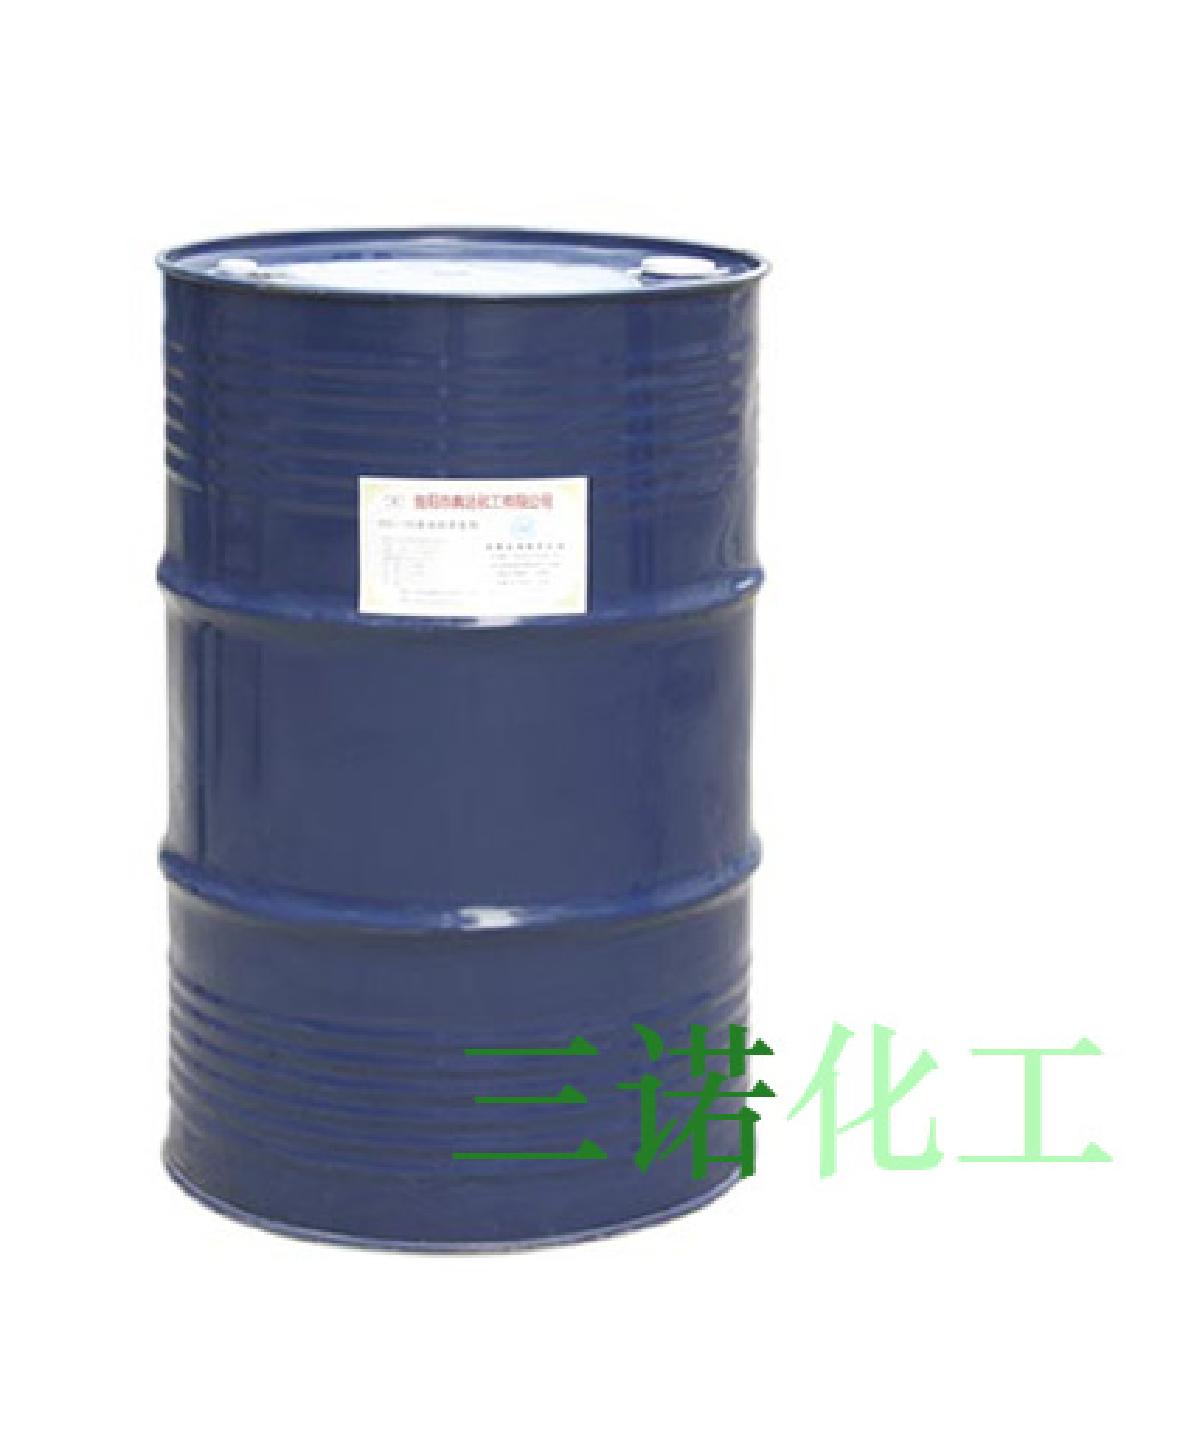 AD-100 High-performance copper-specific extracting agent